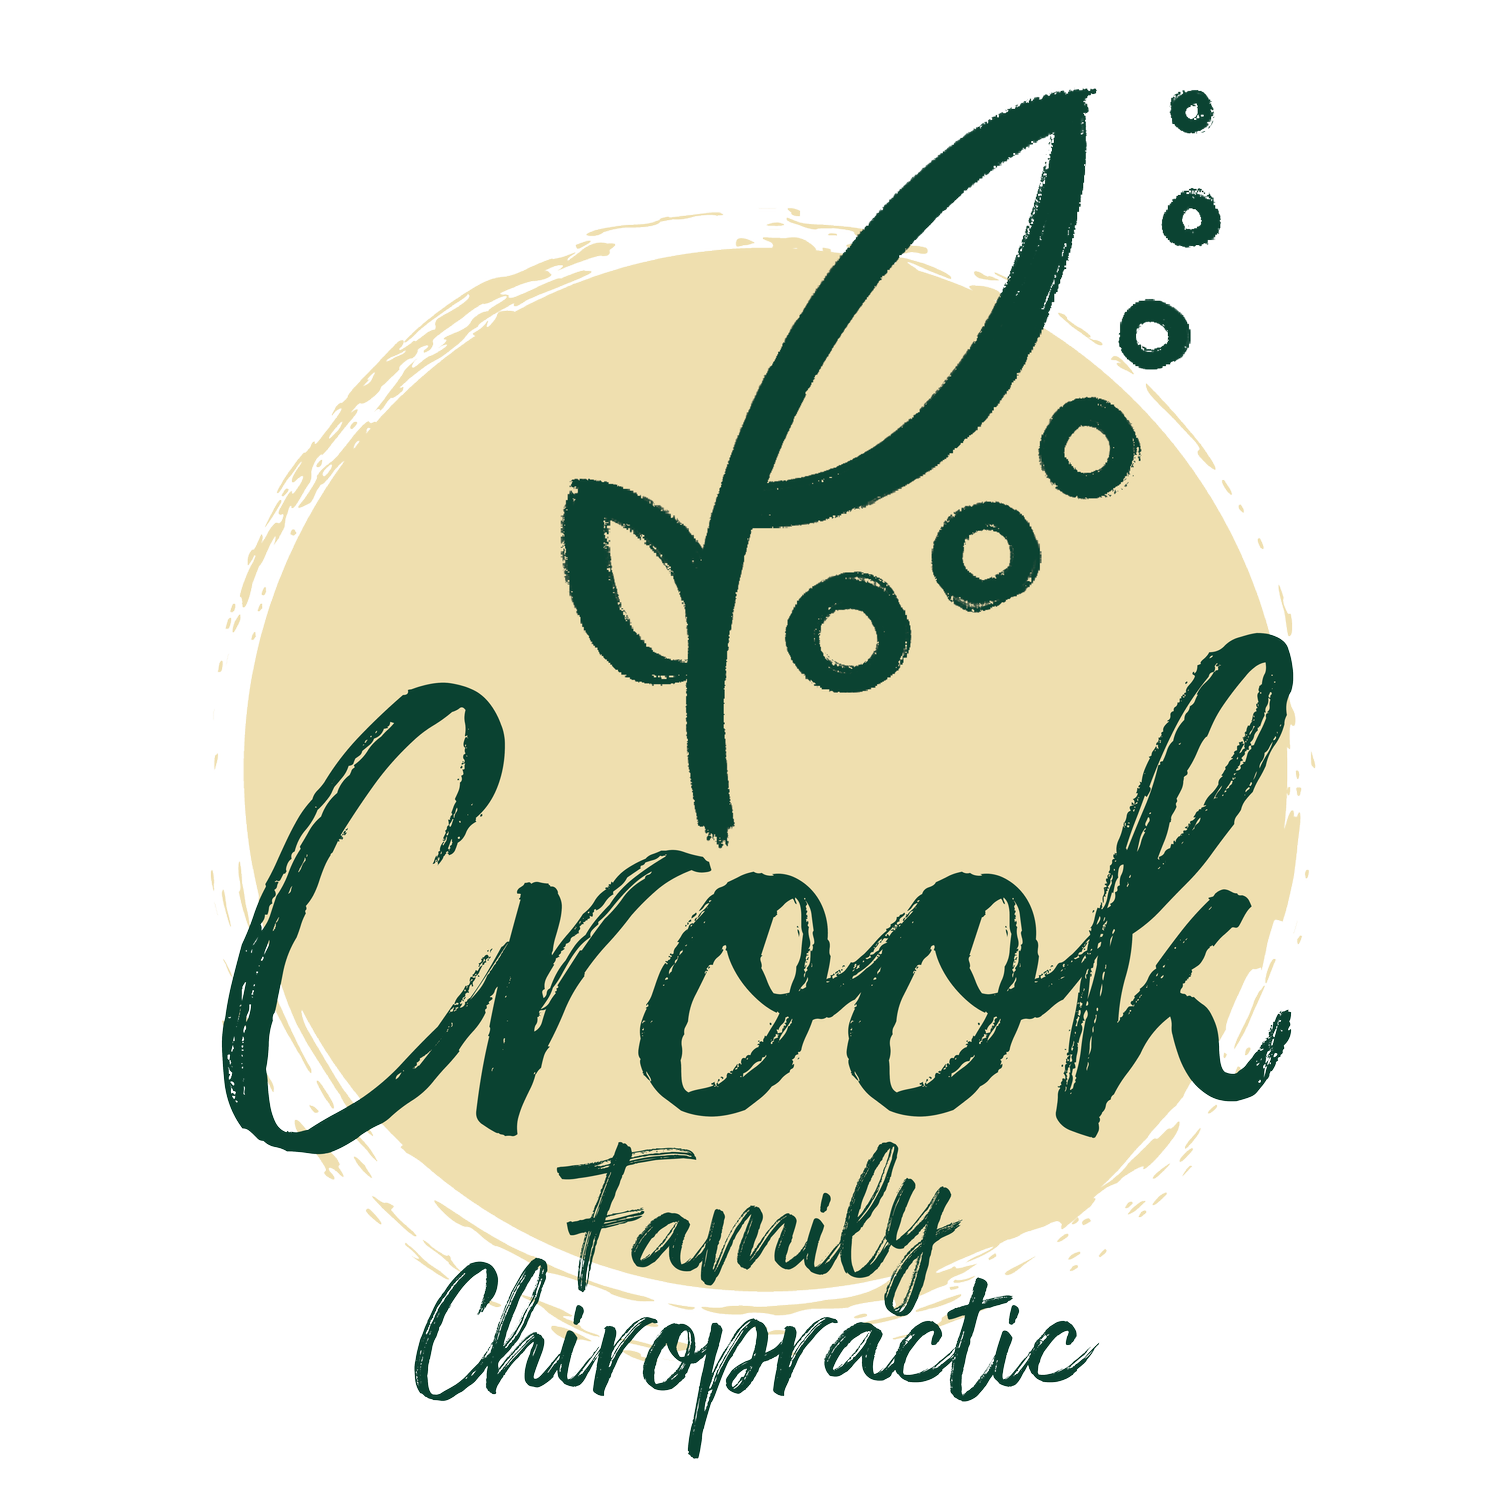 Crook Family Chiropractic